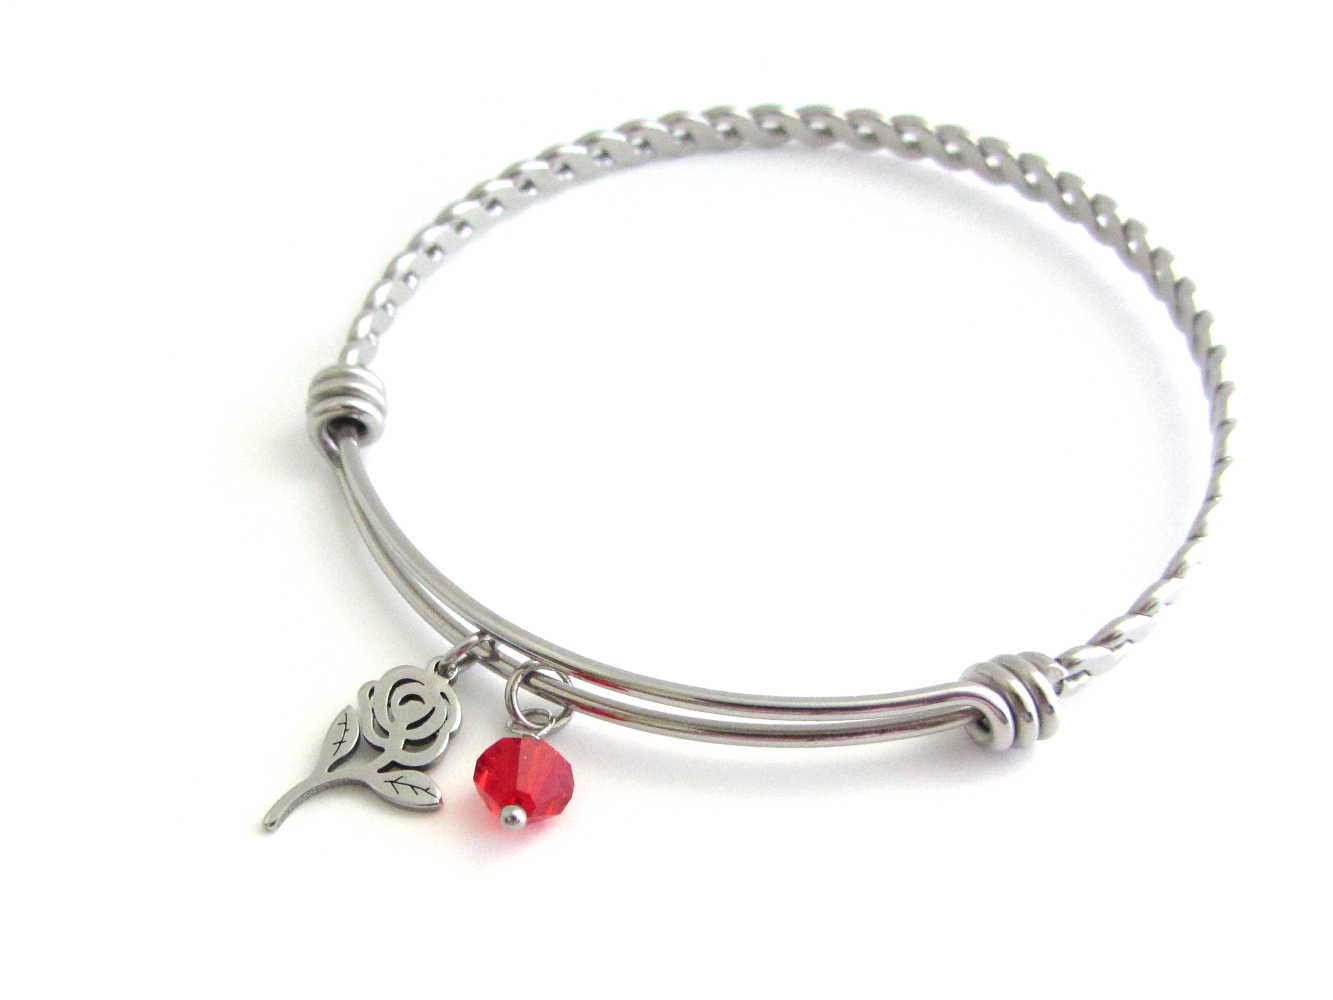 rose flower charm and a red crystal charm on a bangle with braided twist pattern